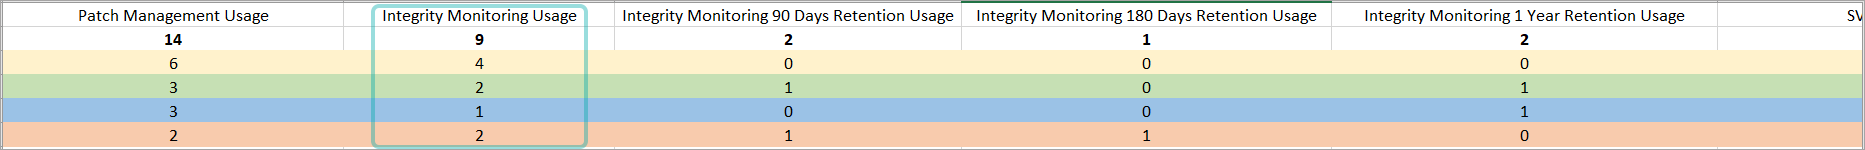 monthly__integritymonitoring_usage_340181_en.png